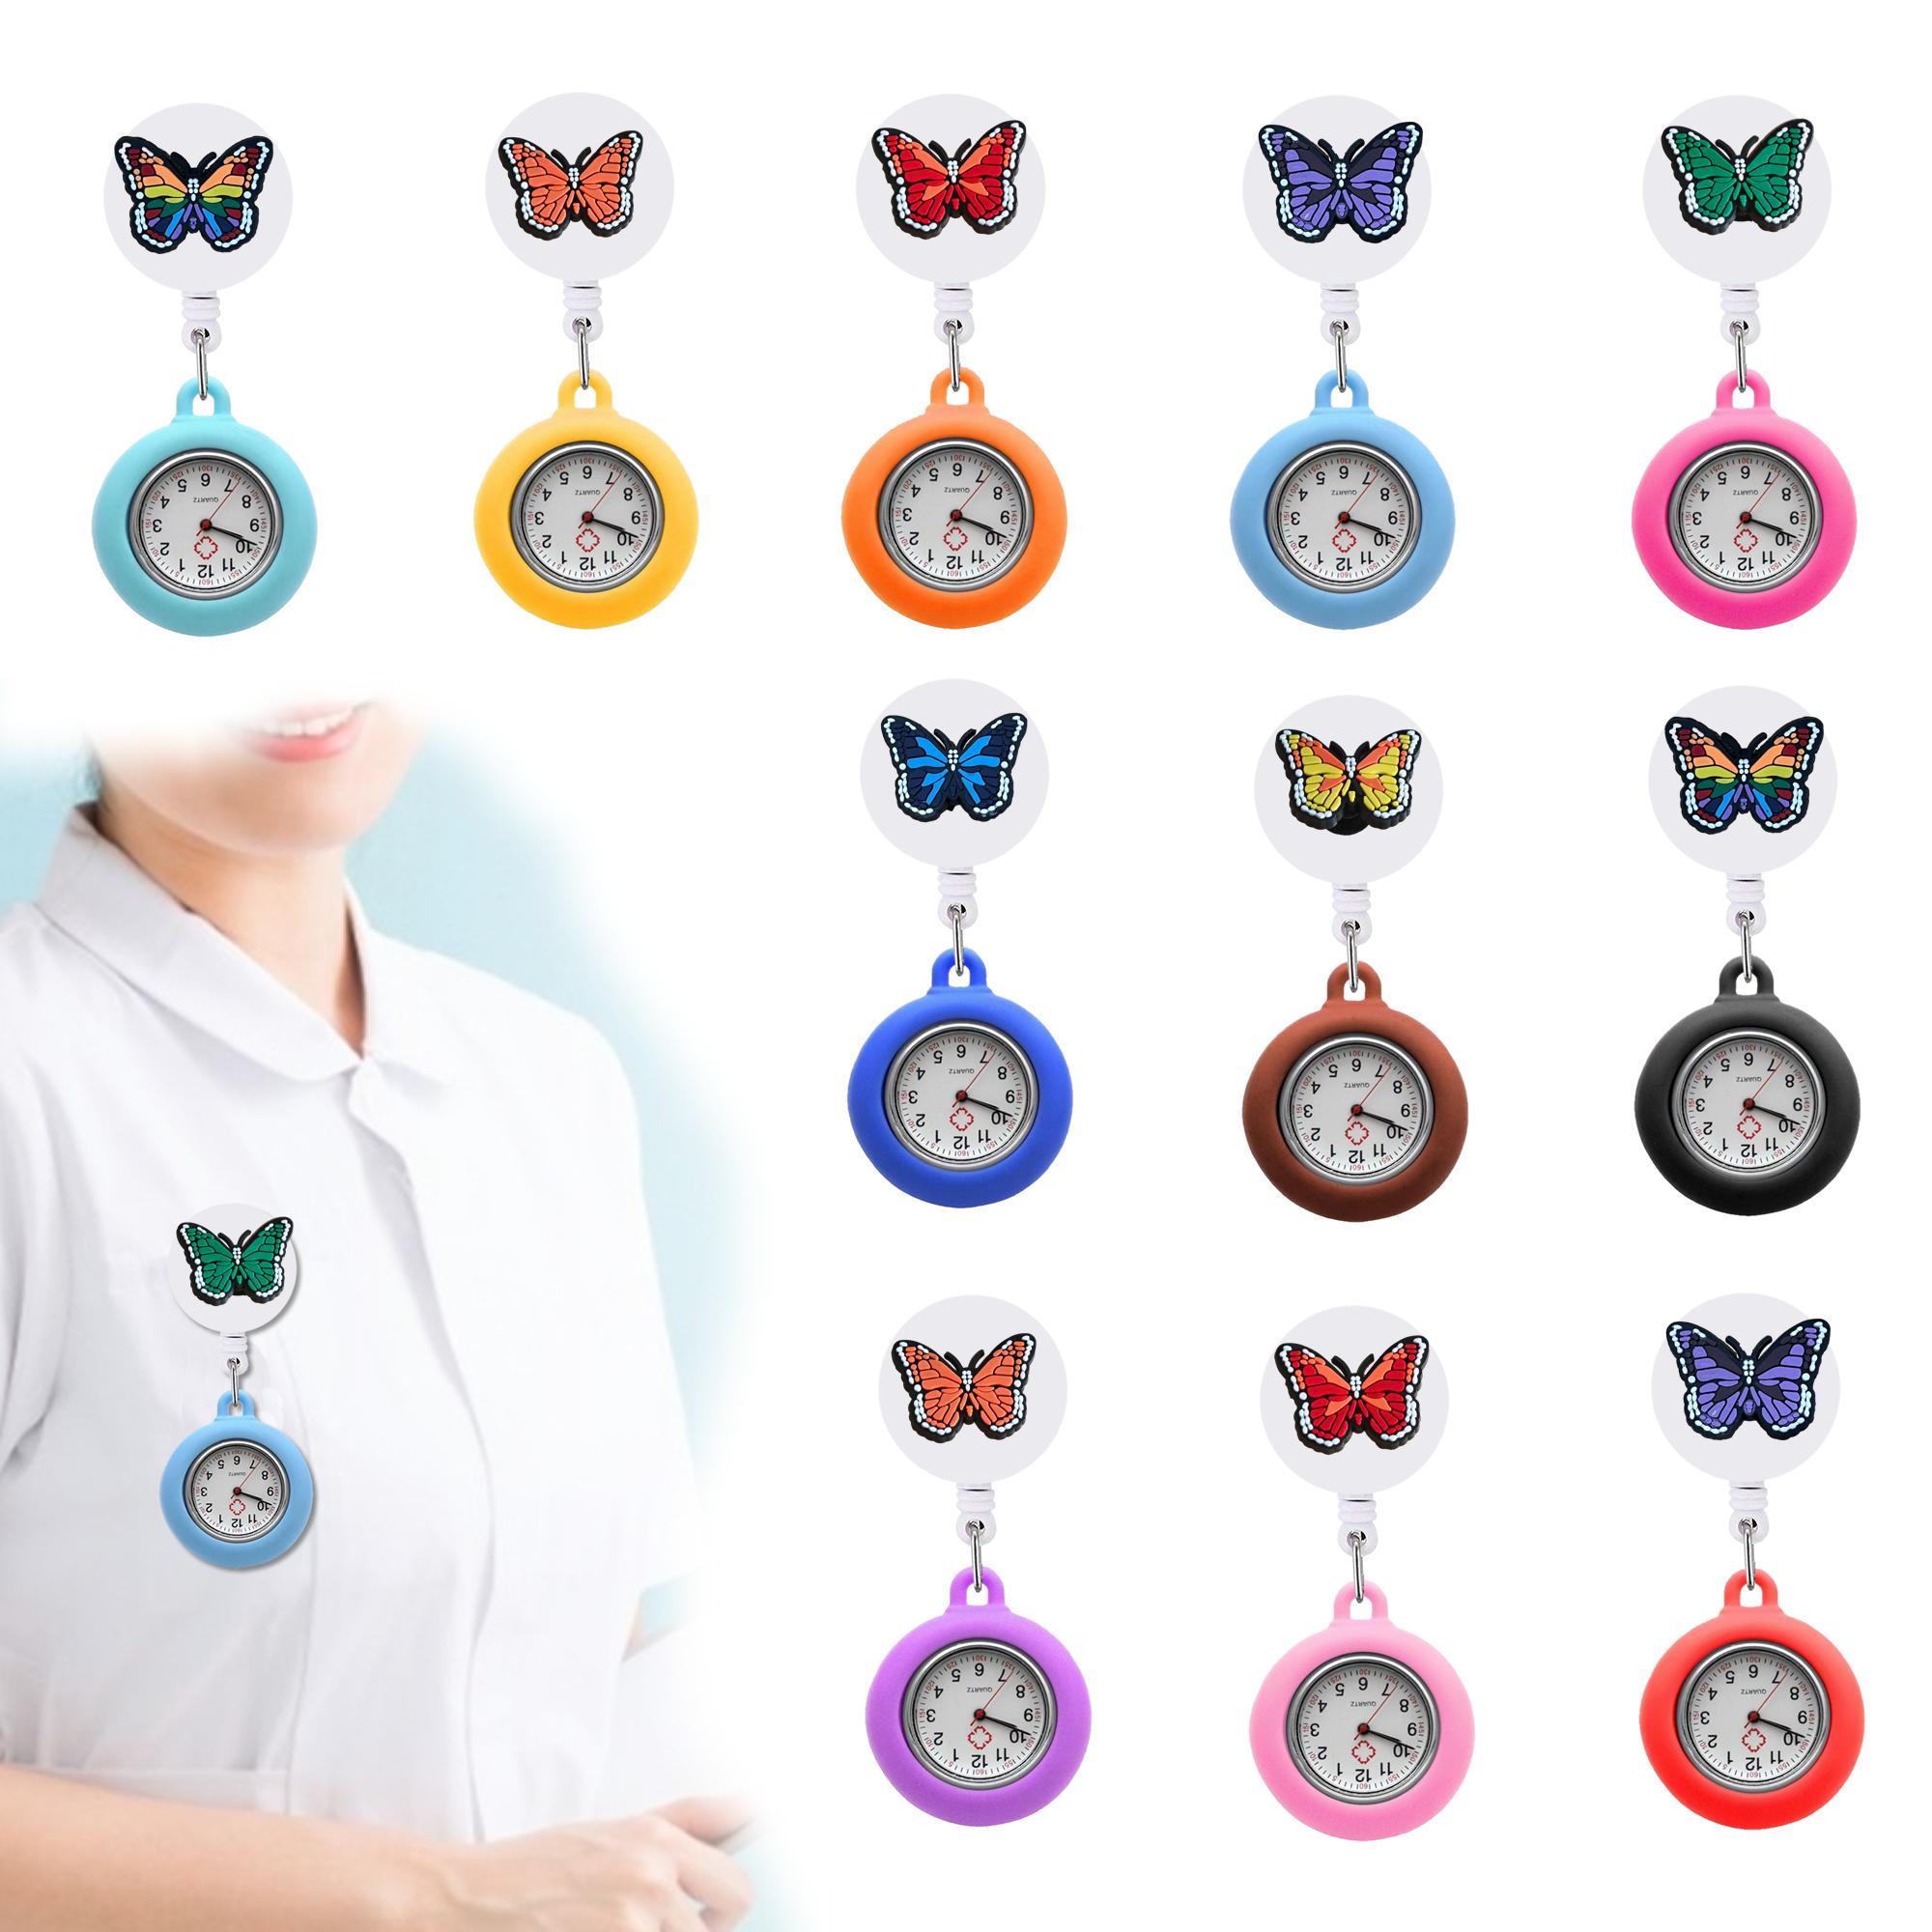 Charms Butterfly Clip Pocket Watchs Fob Hang Medicine Medicine Clock Watch On Watch